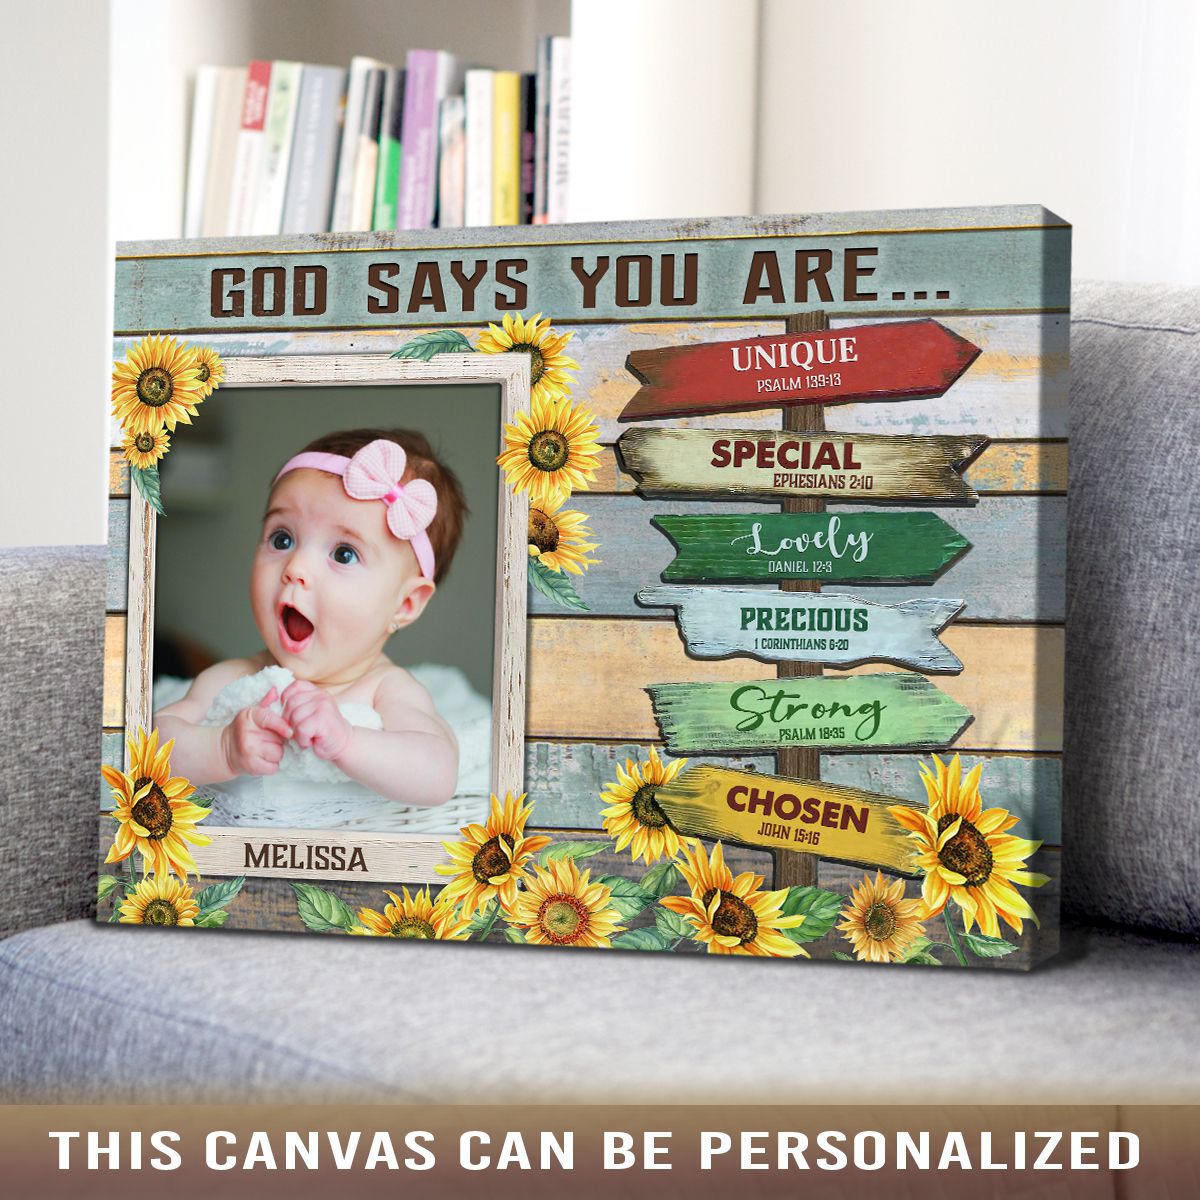 https://images.ohcanvas.com/ohcanvas_com/2022/06/23023811/mom-daughter-gift-ideas-sentimental-gift-for-daughter-customized-photo-canvas-wall-art02.jpg